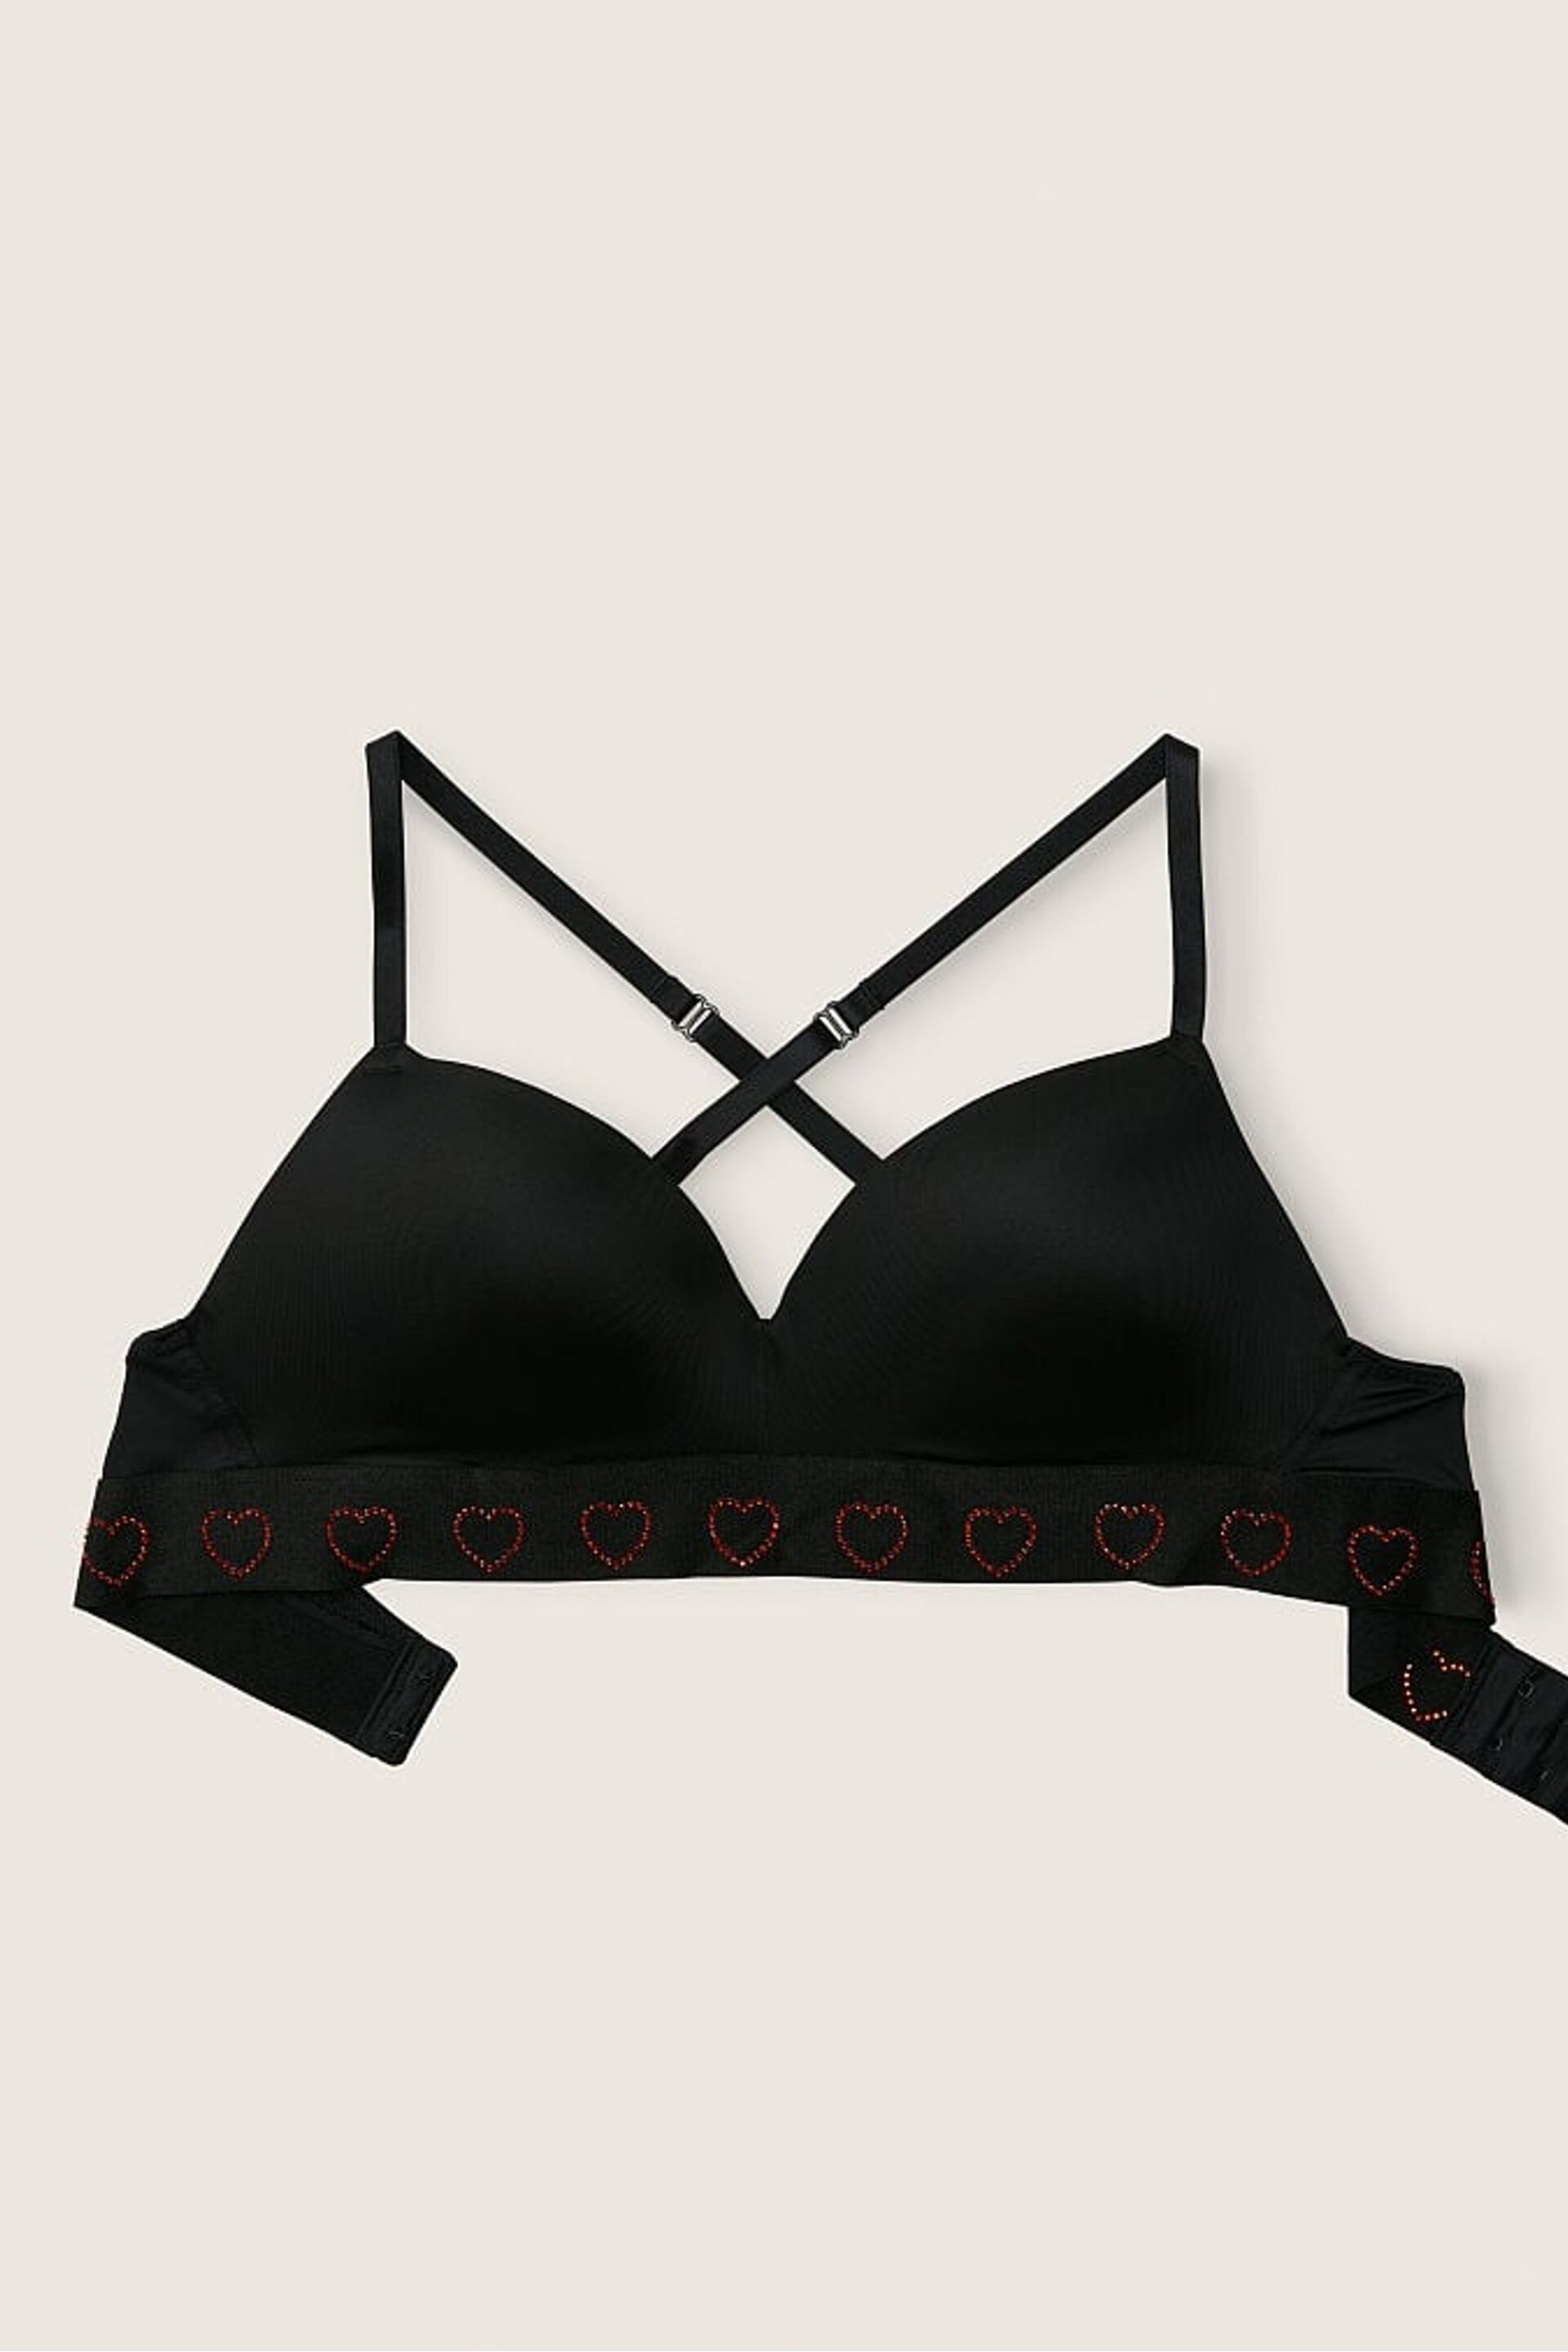 Victoria's Secret PINK Pure Black Heart Shine Smooth Non Wired Push Up T-Shirt Bra - Image 4 of 5